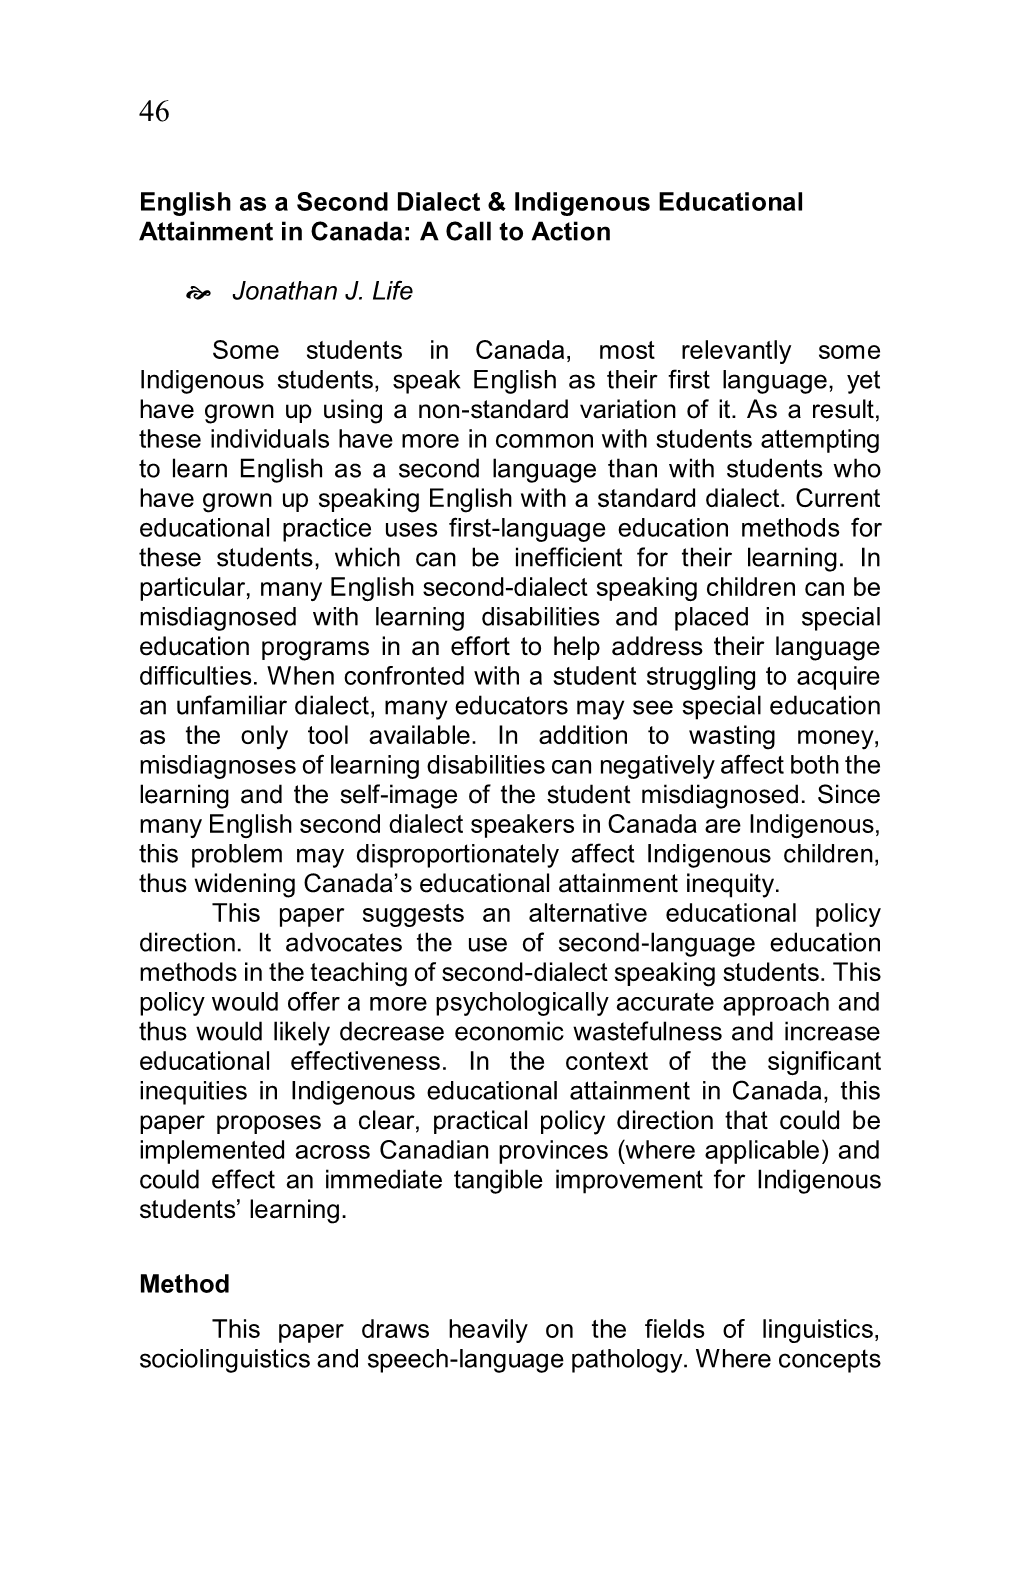 English As a Second Dialect & Indigenous Educational Attainment in Canada